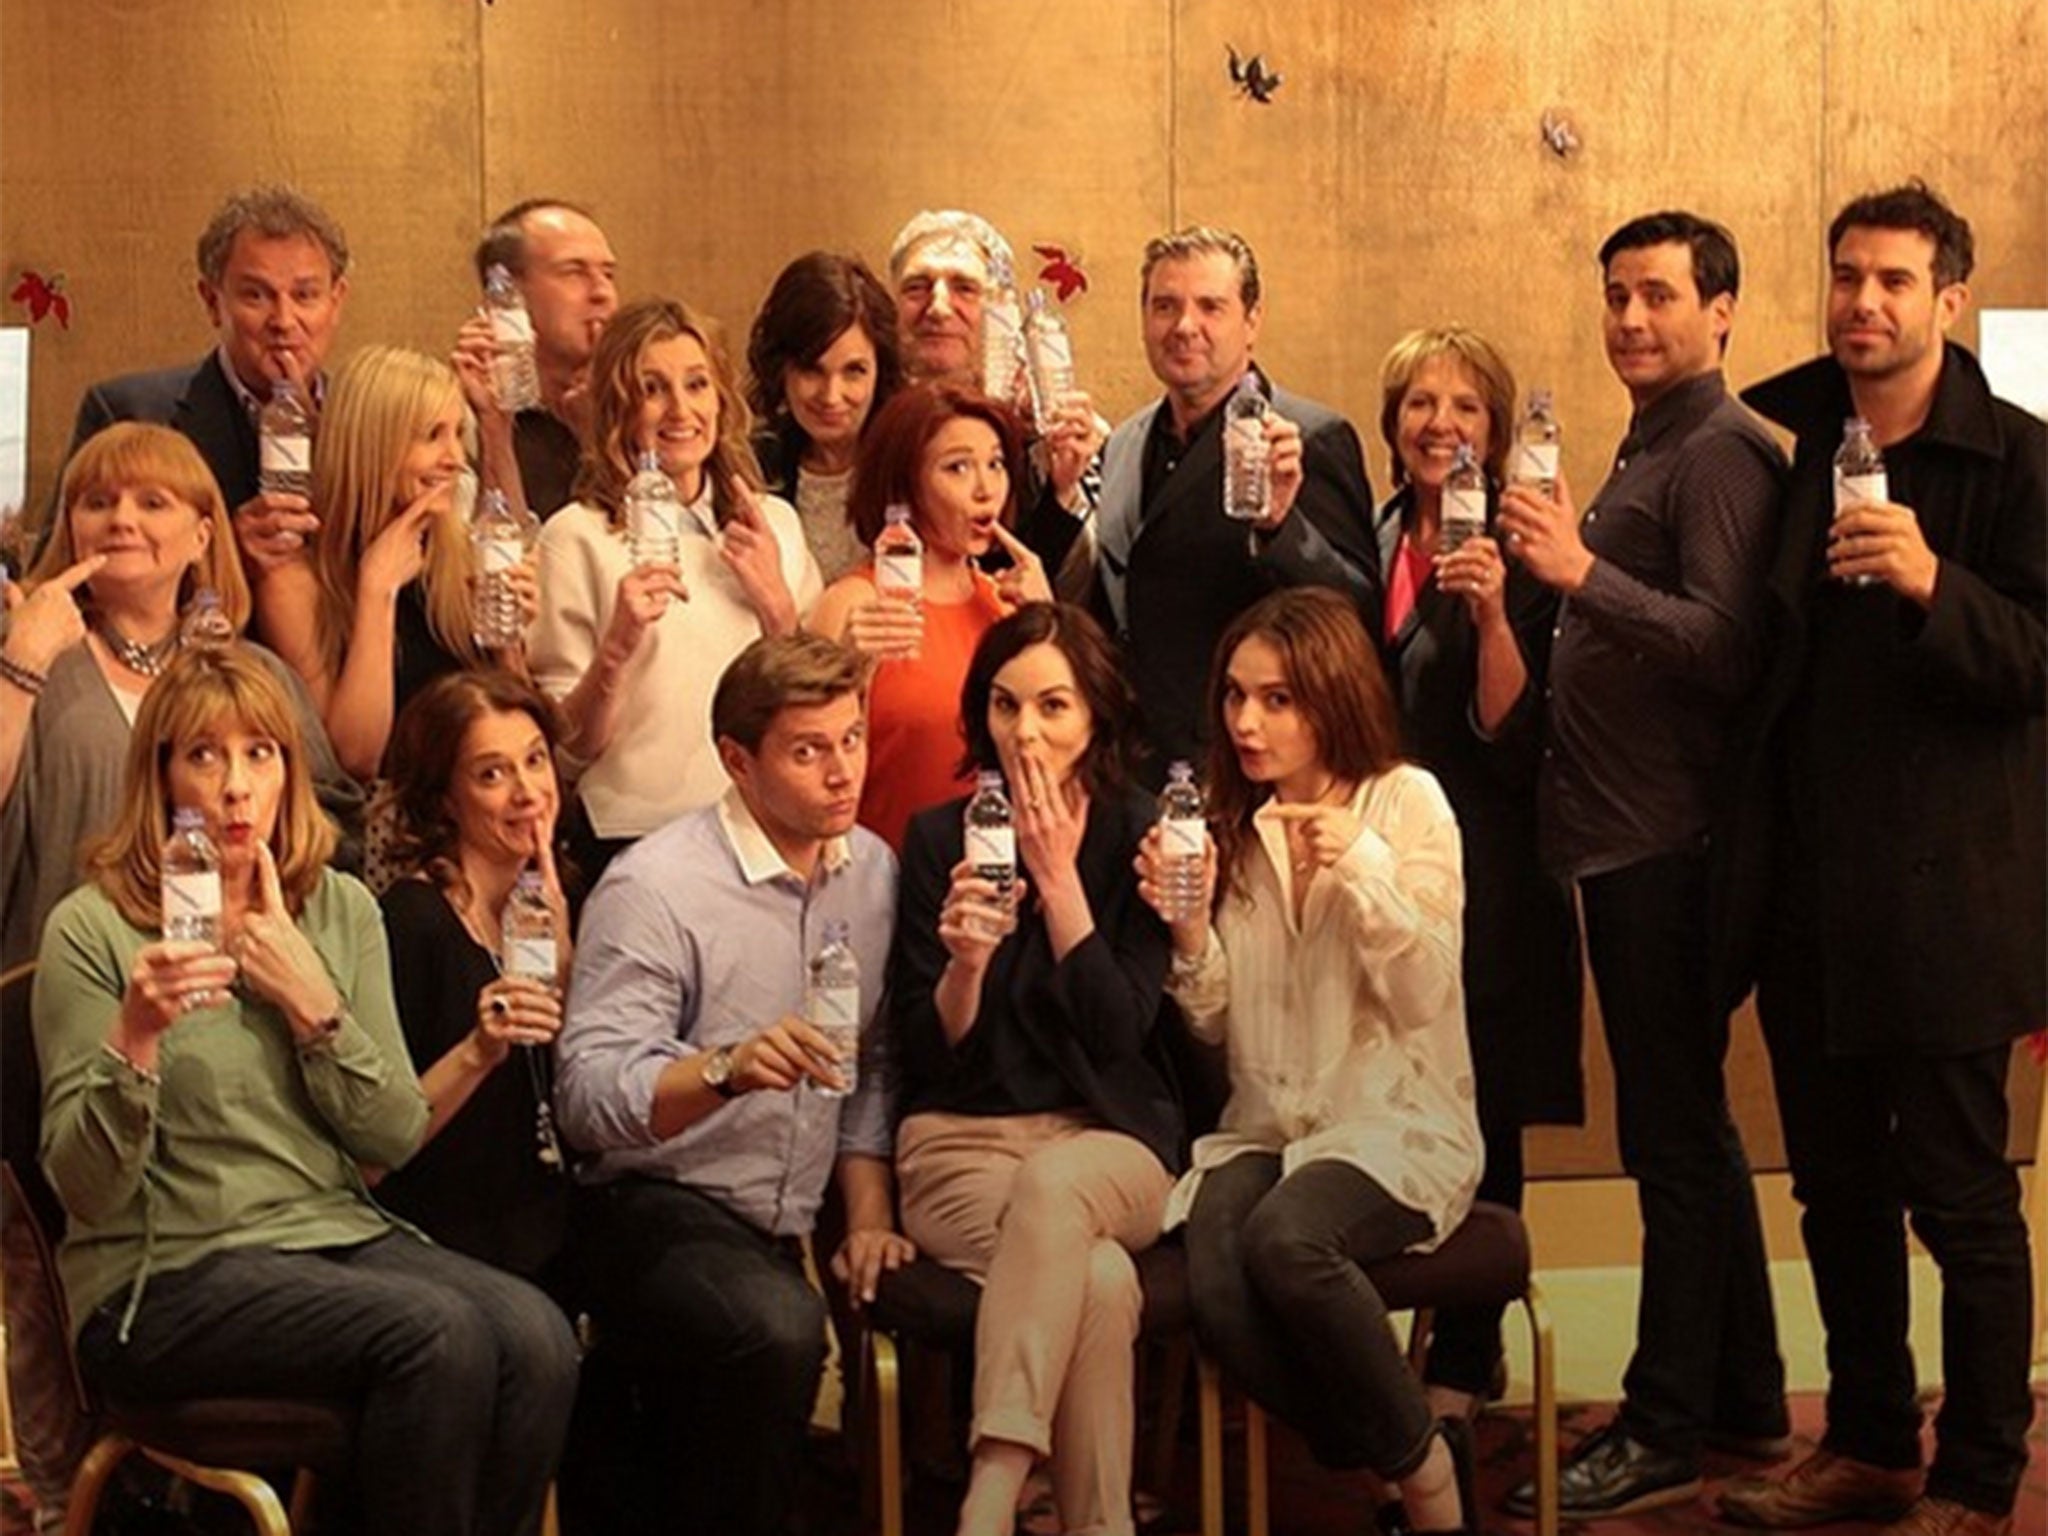 The Downton Abbey cast have made light of the water bottle promo photo gaffe and turned the attention to WaterAid